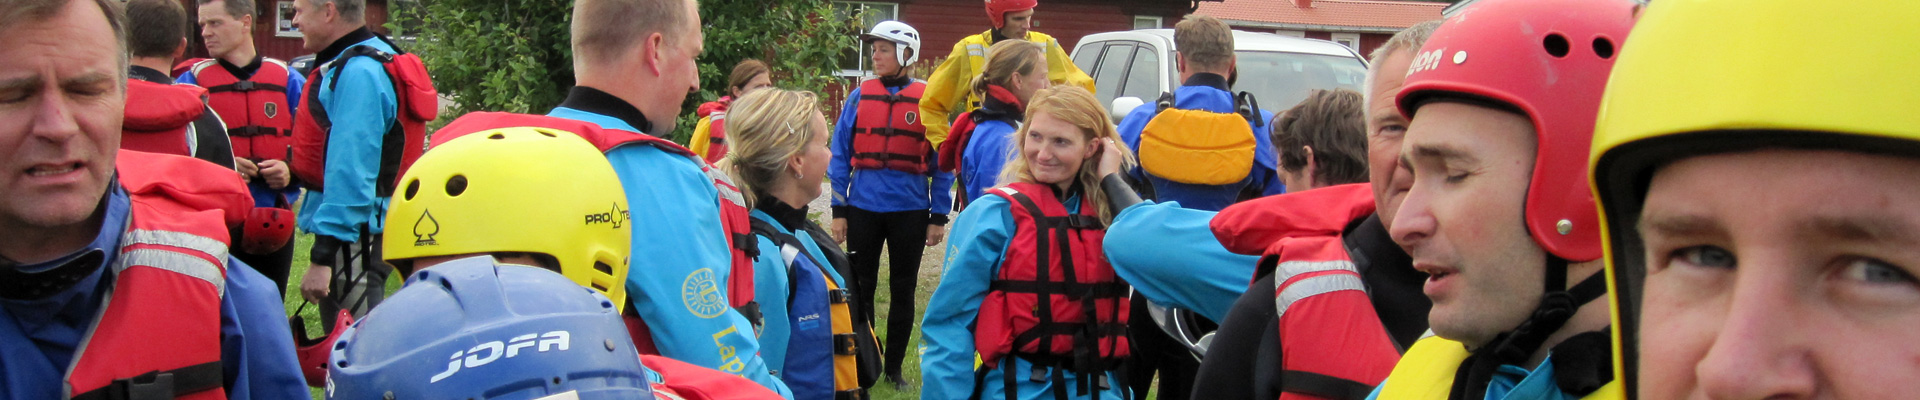 Rafting group in Swedish Lapland